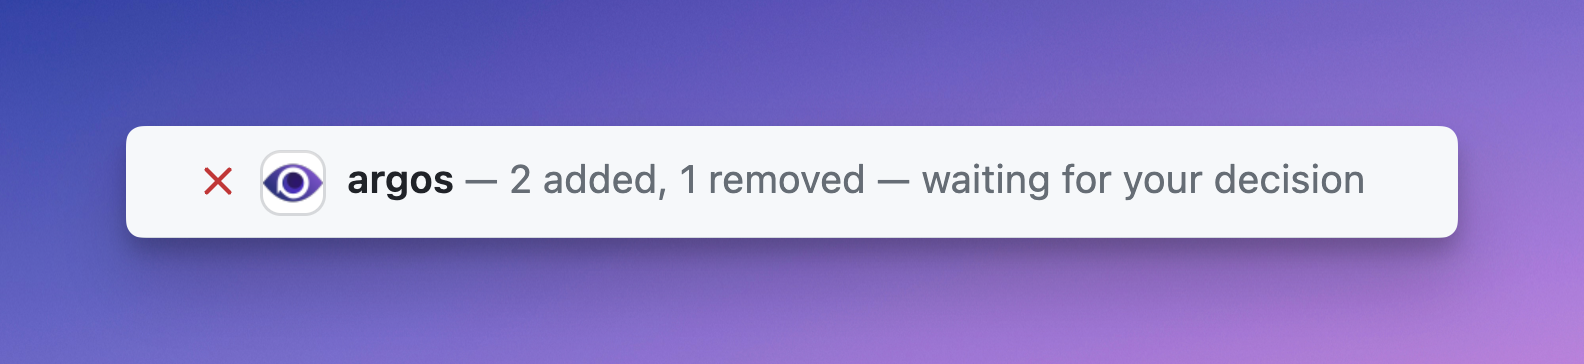 Added and removed screenshot from Argos in GitHub commit status